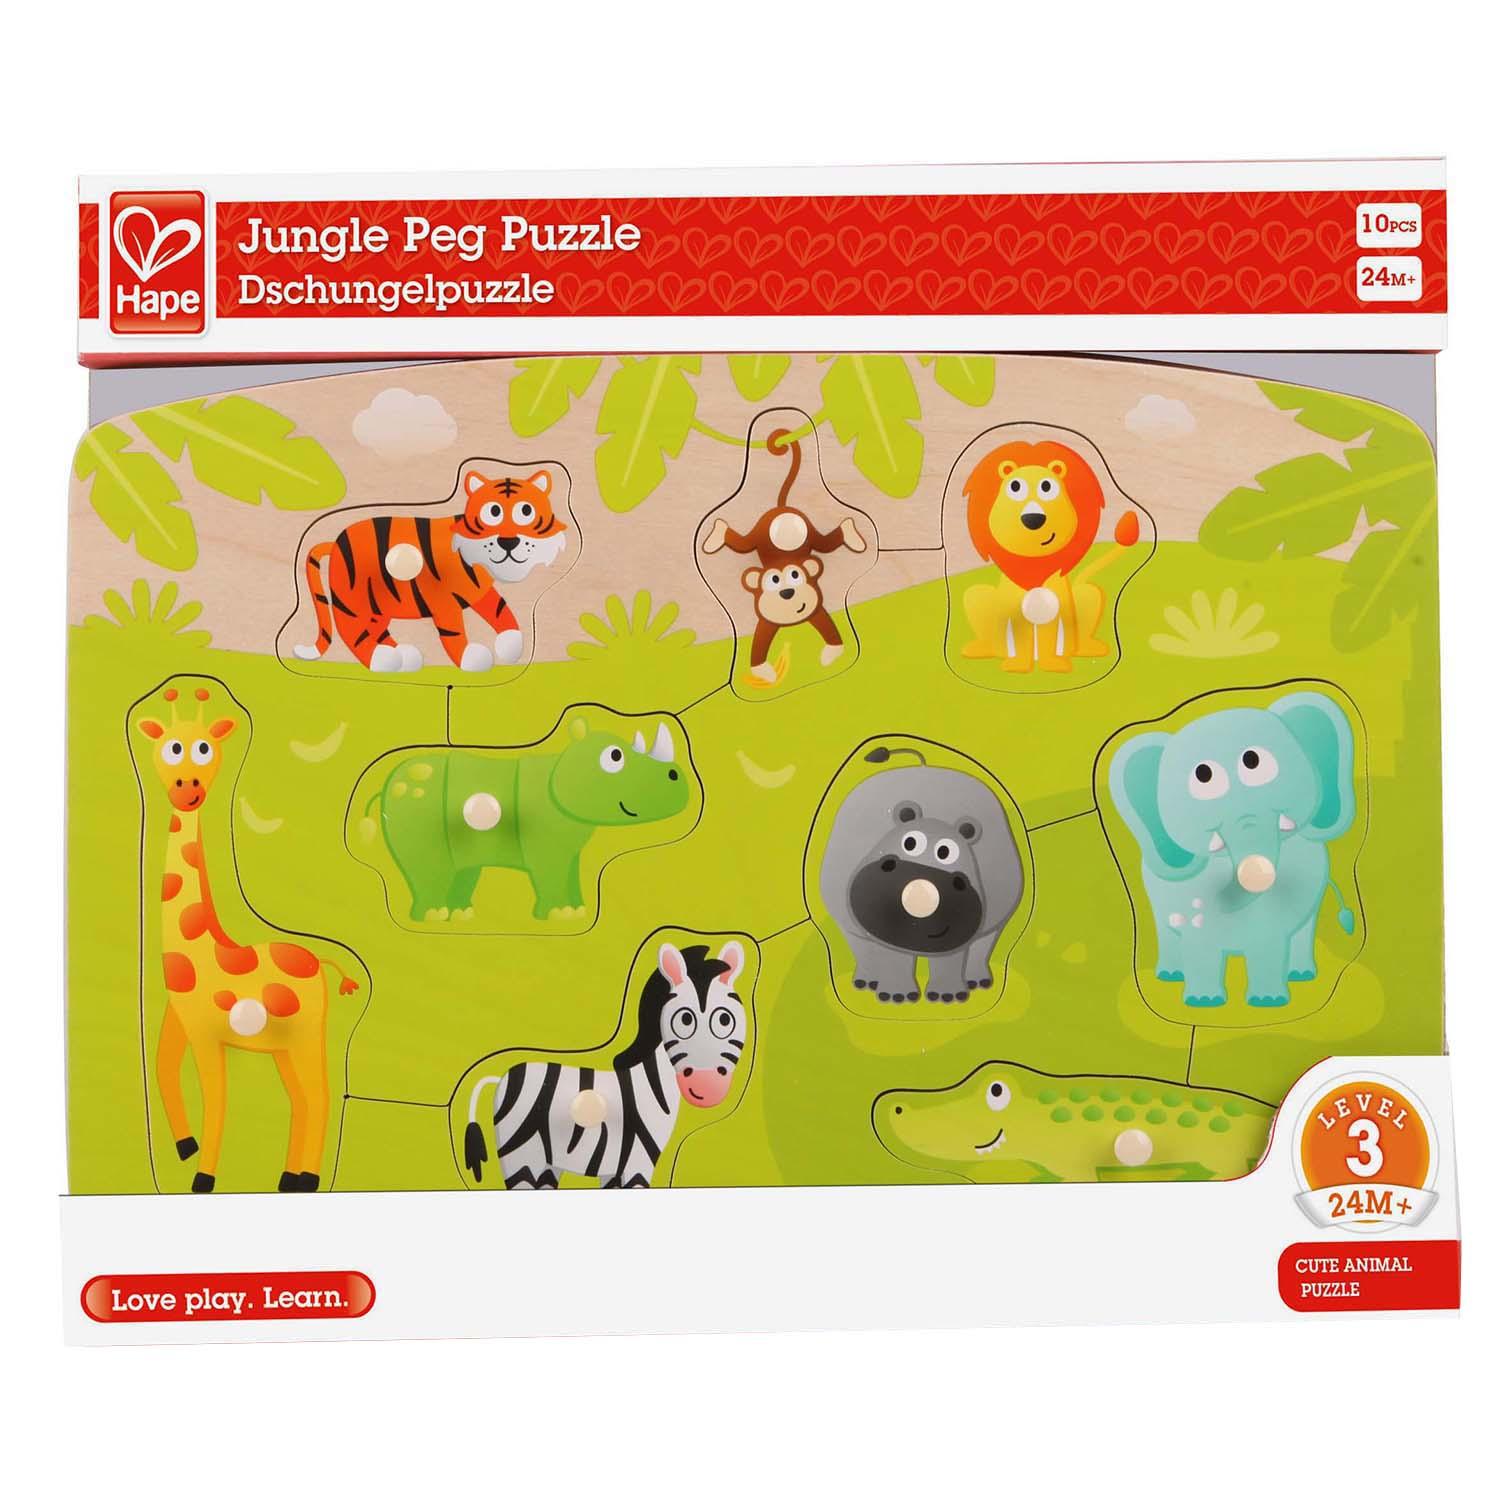 Packaging for jungle puzzle.